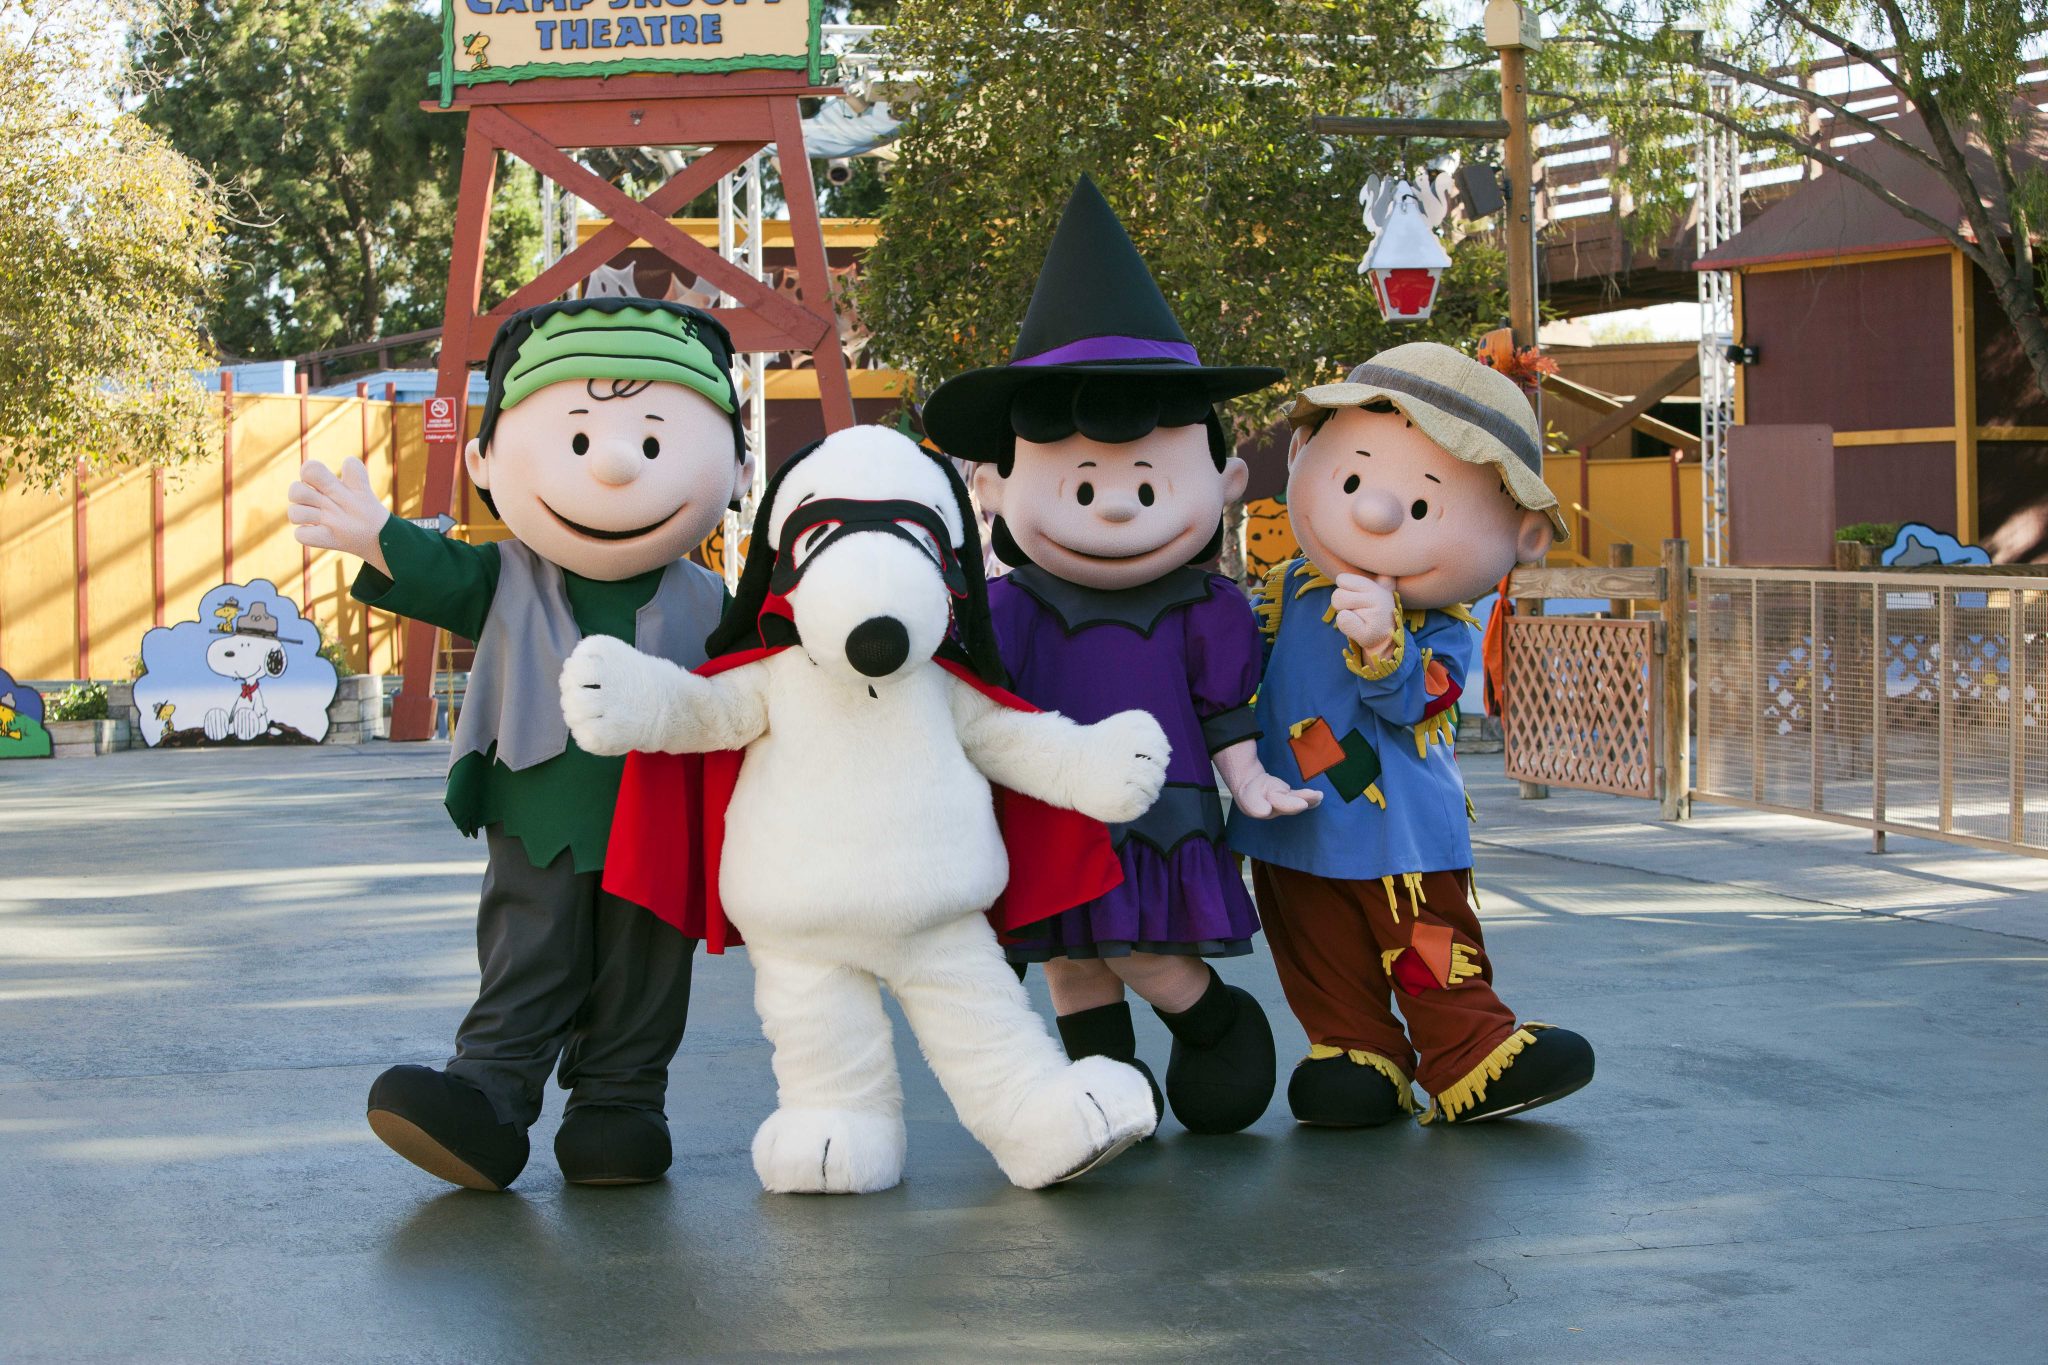 Knott’s Spooky Farm Expanded For 2016